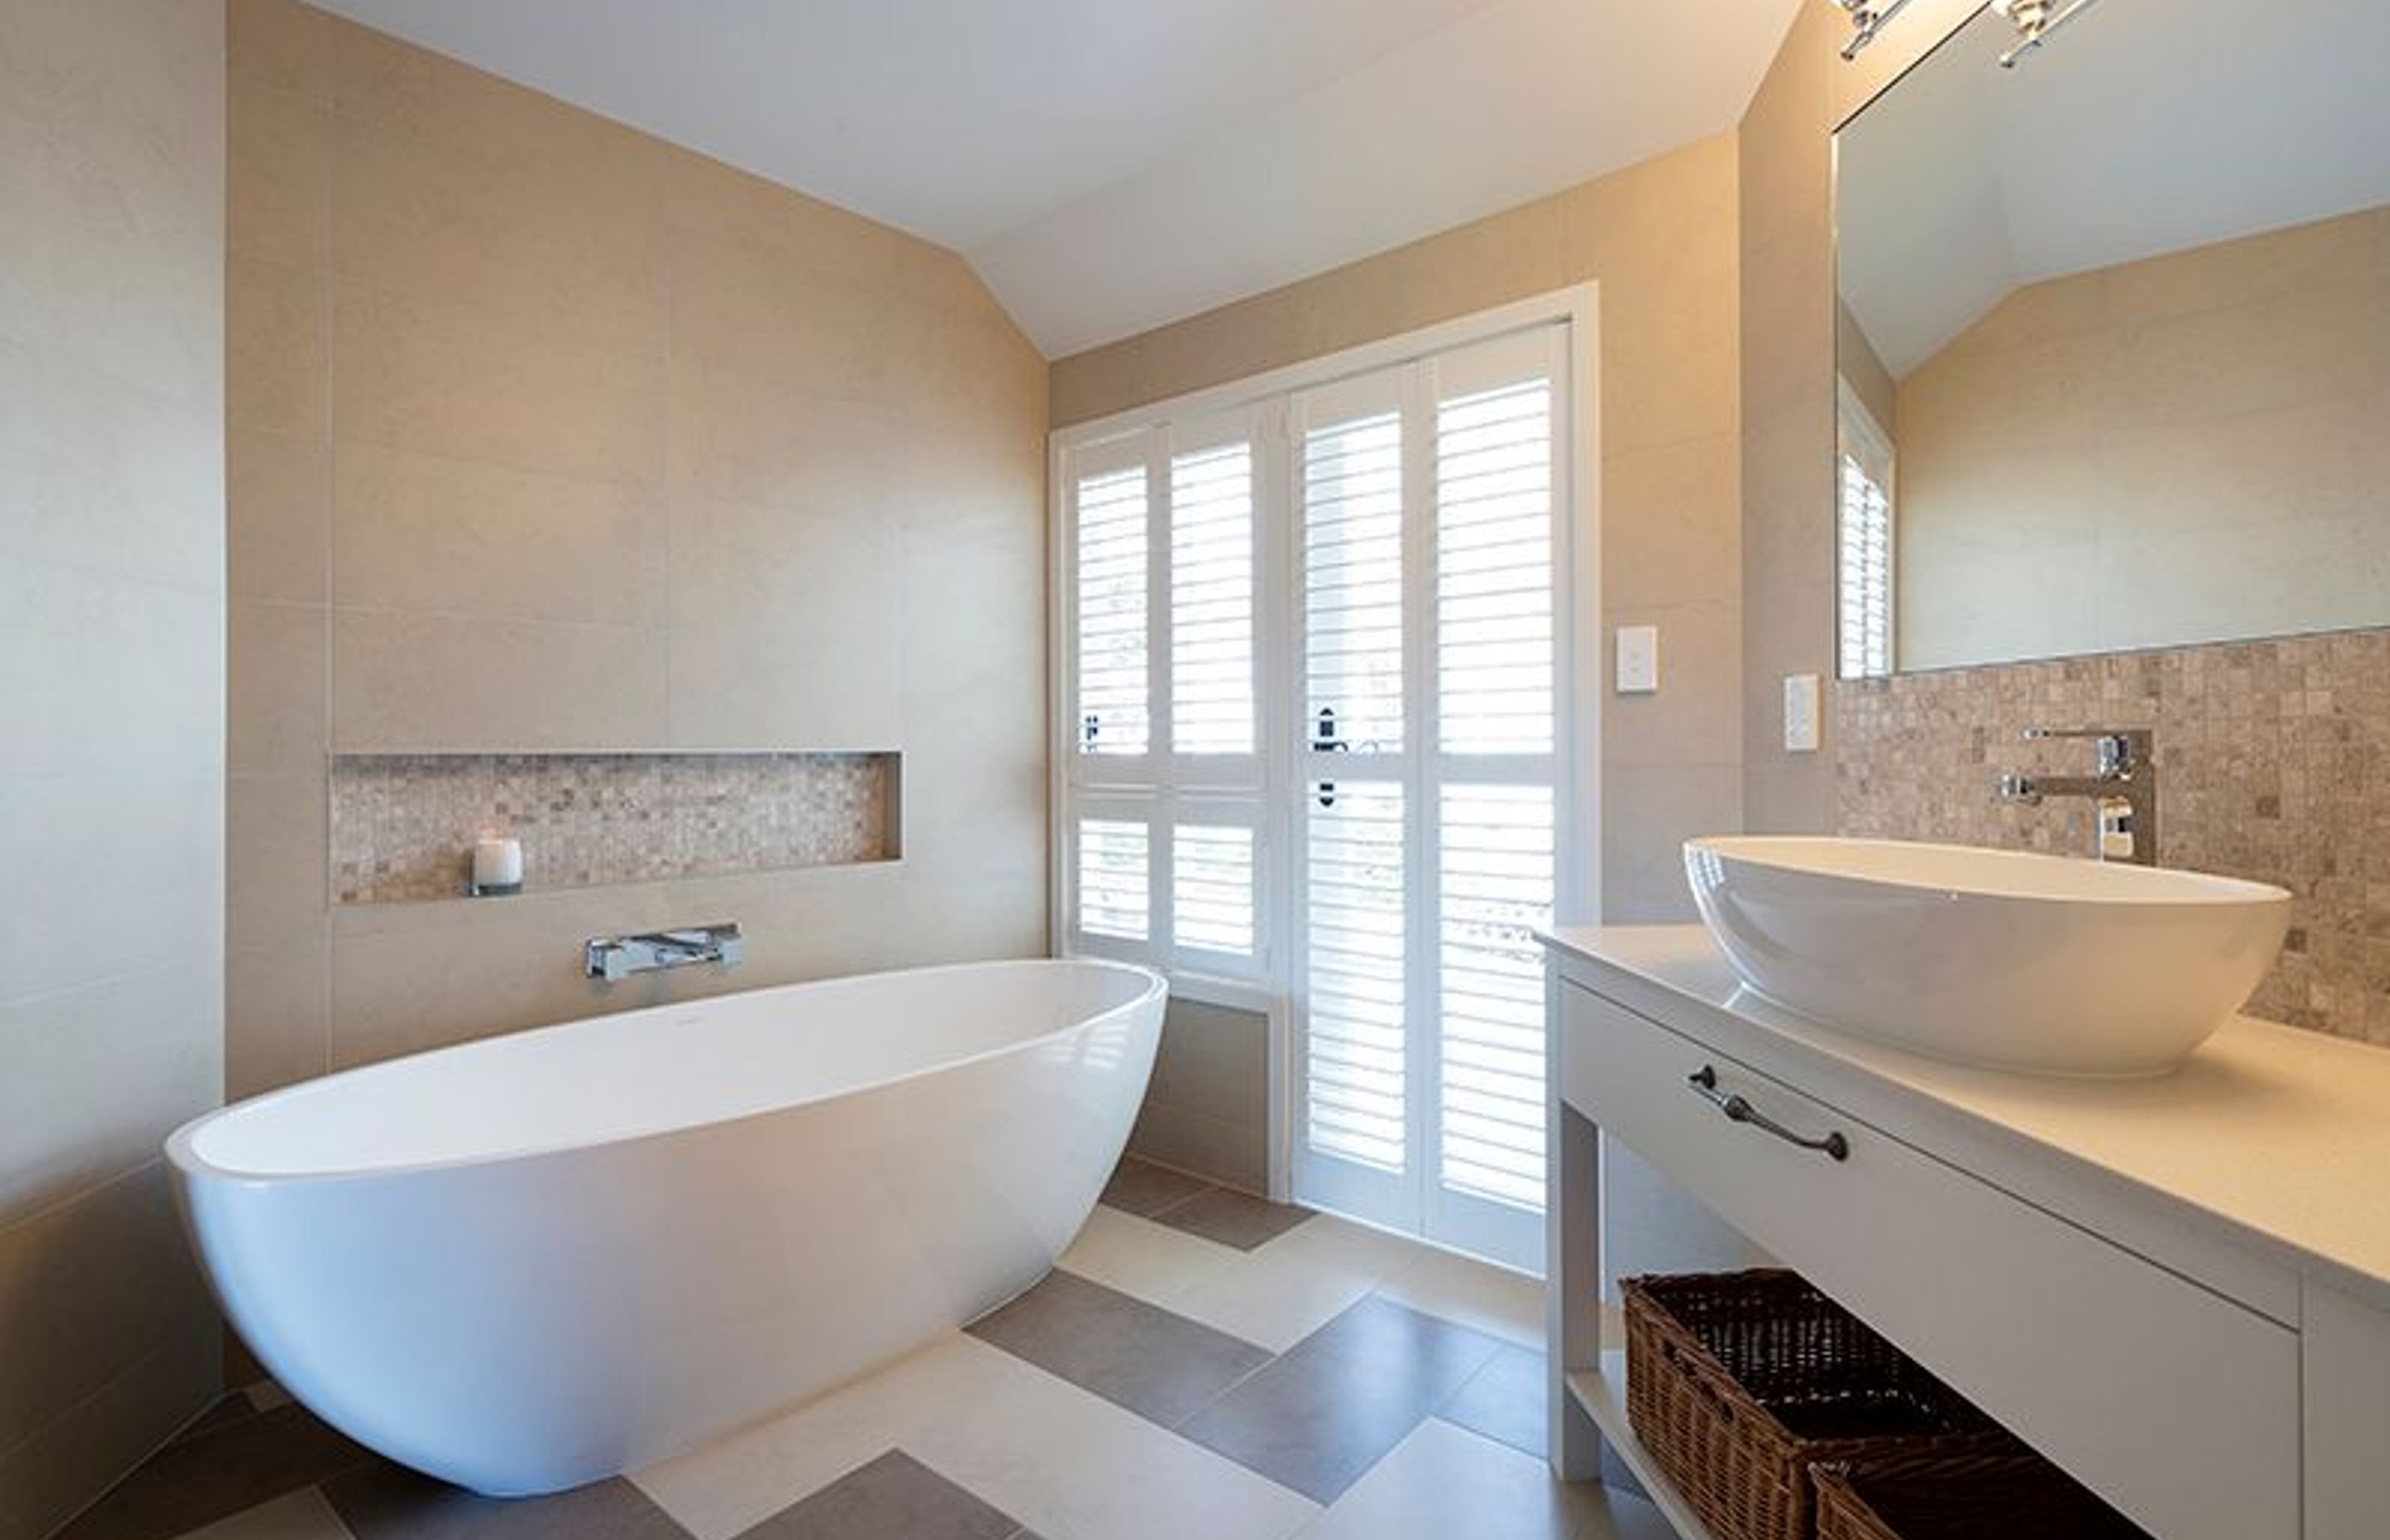 Family bathroom with custom vanity, shutters lead to outdoor spa courtyard